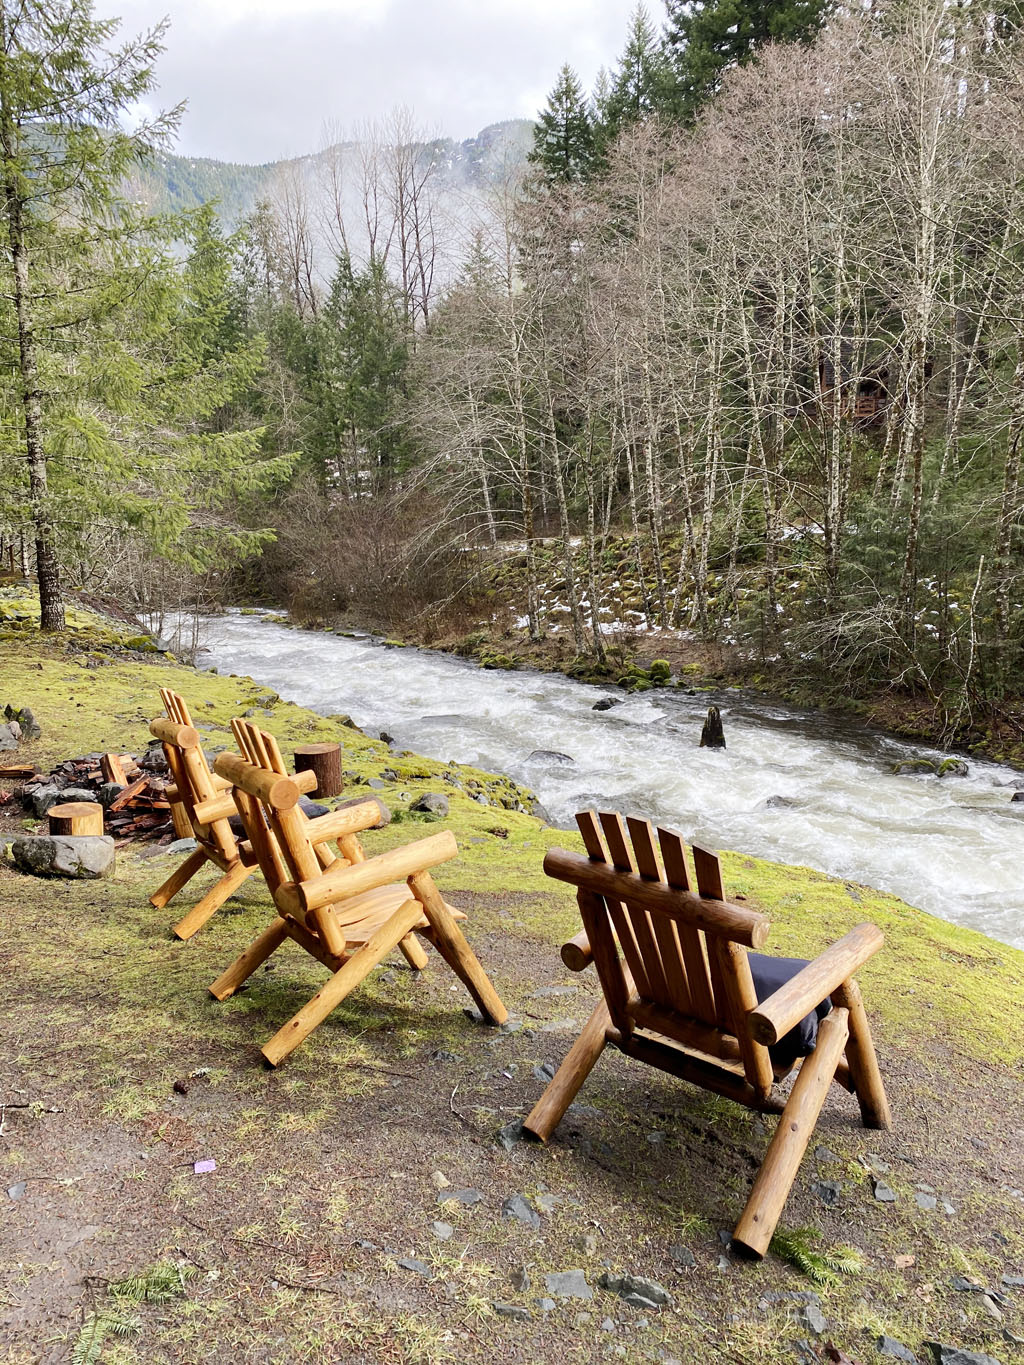 Adirondack chairs overlooking a river near Mt. Hood skiing areas